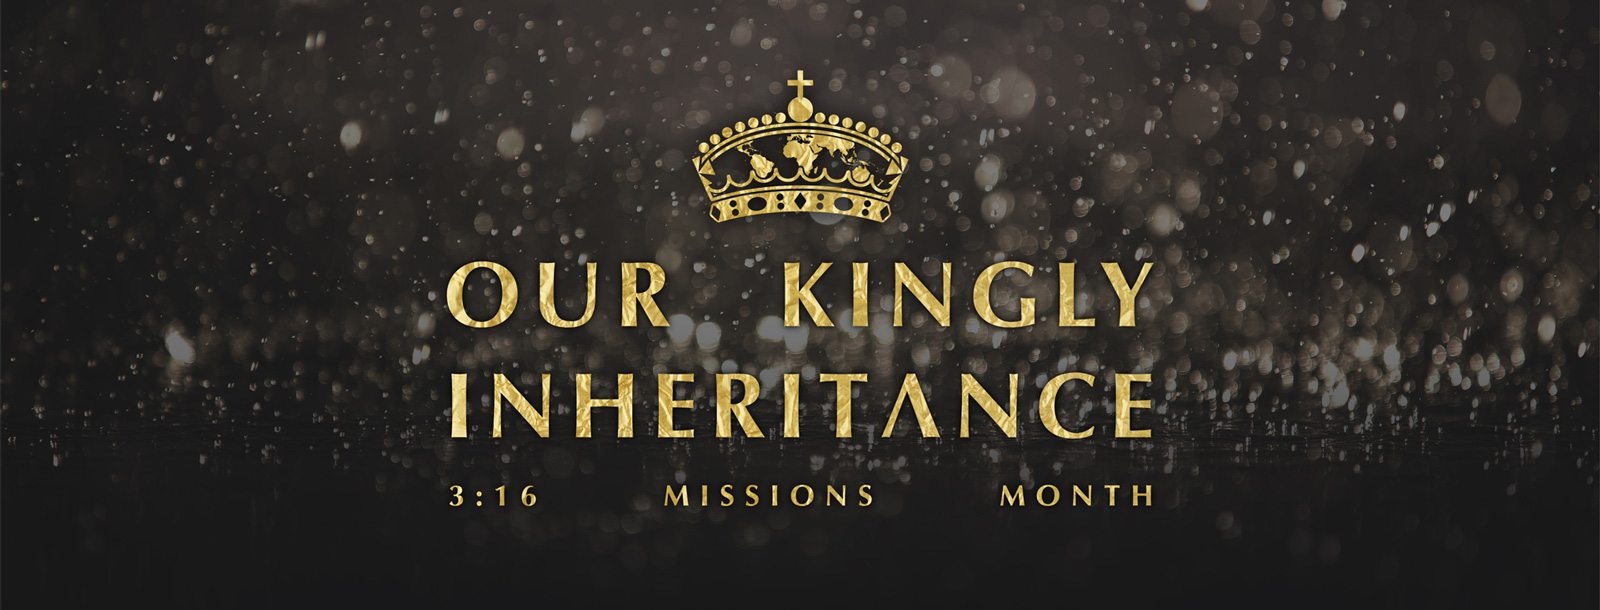 Our Kingly Inheritance: 3:16 Church Missions Month